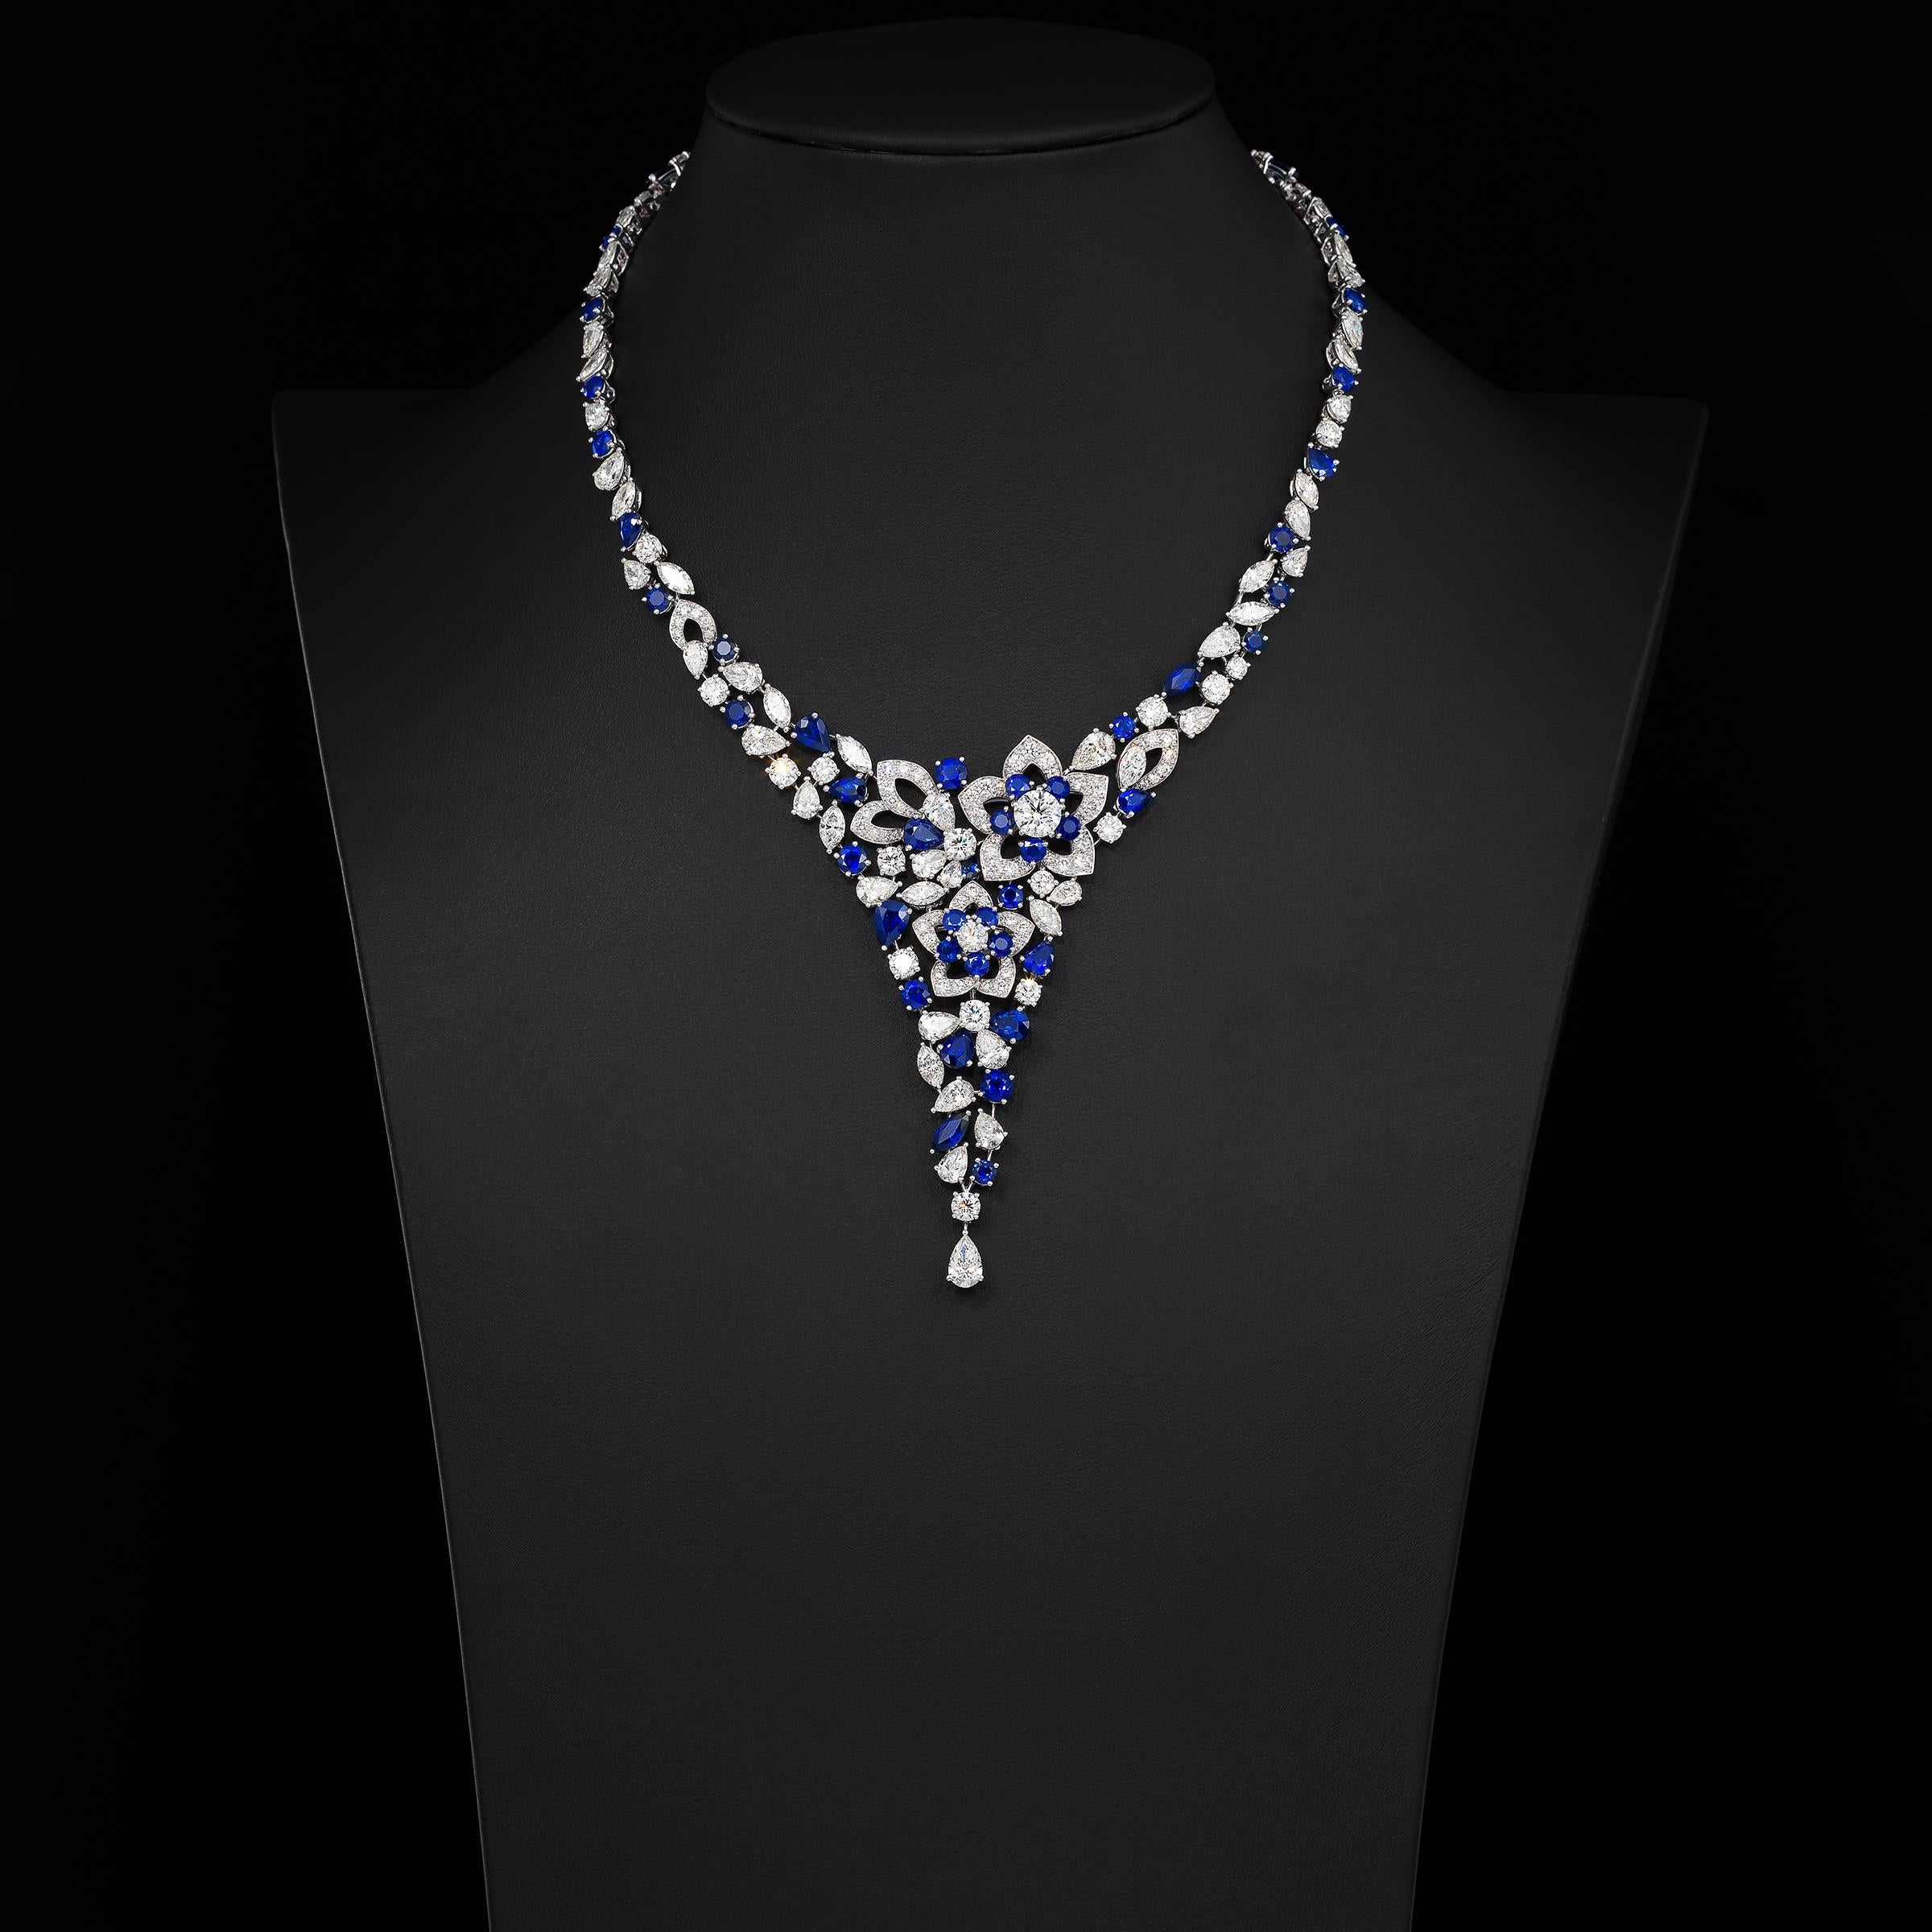 Sensational Graff necklace of floral inspiration and showcasing 33.3 carats of finest white diamonds (approximately D to G color, VVS to VS clarity) and 25.3 carats of richly saturated blue sapphires, all masterfully set in 18 karat white gold. The